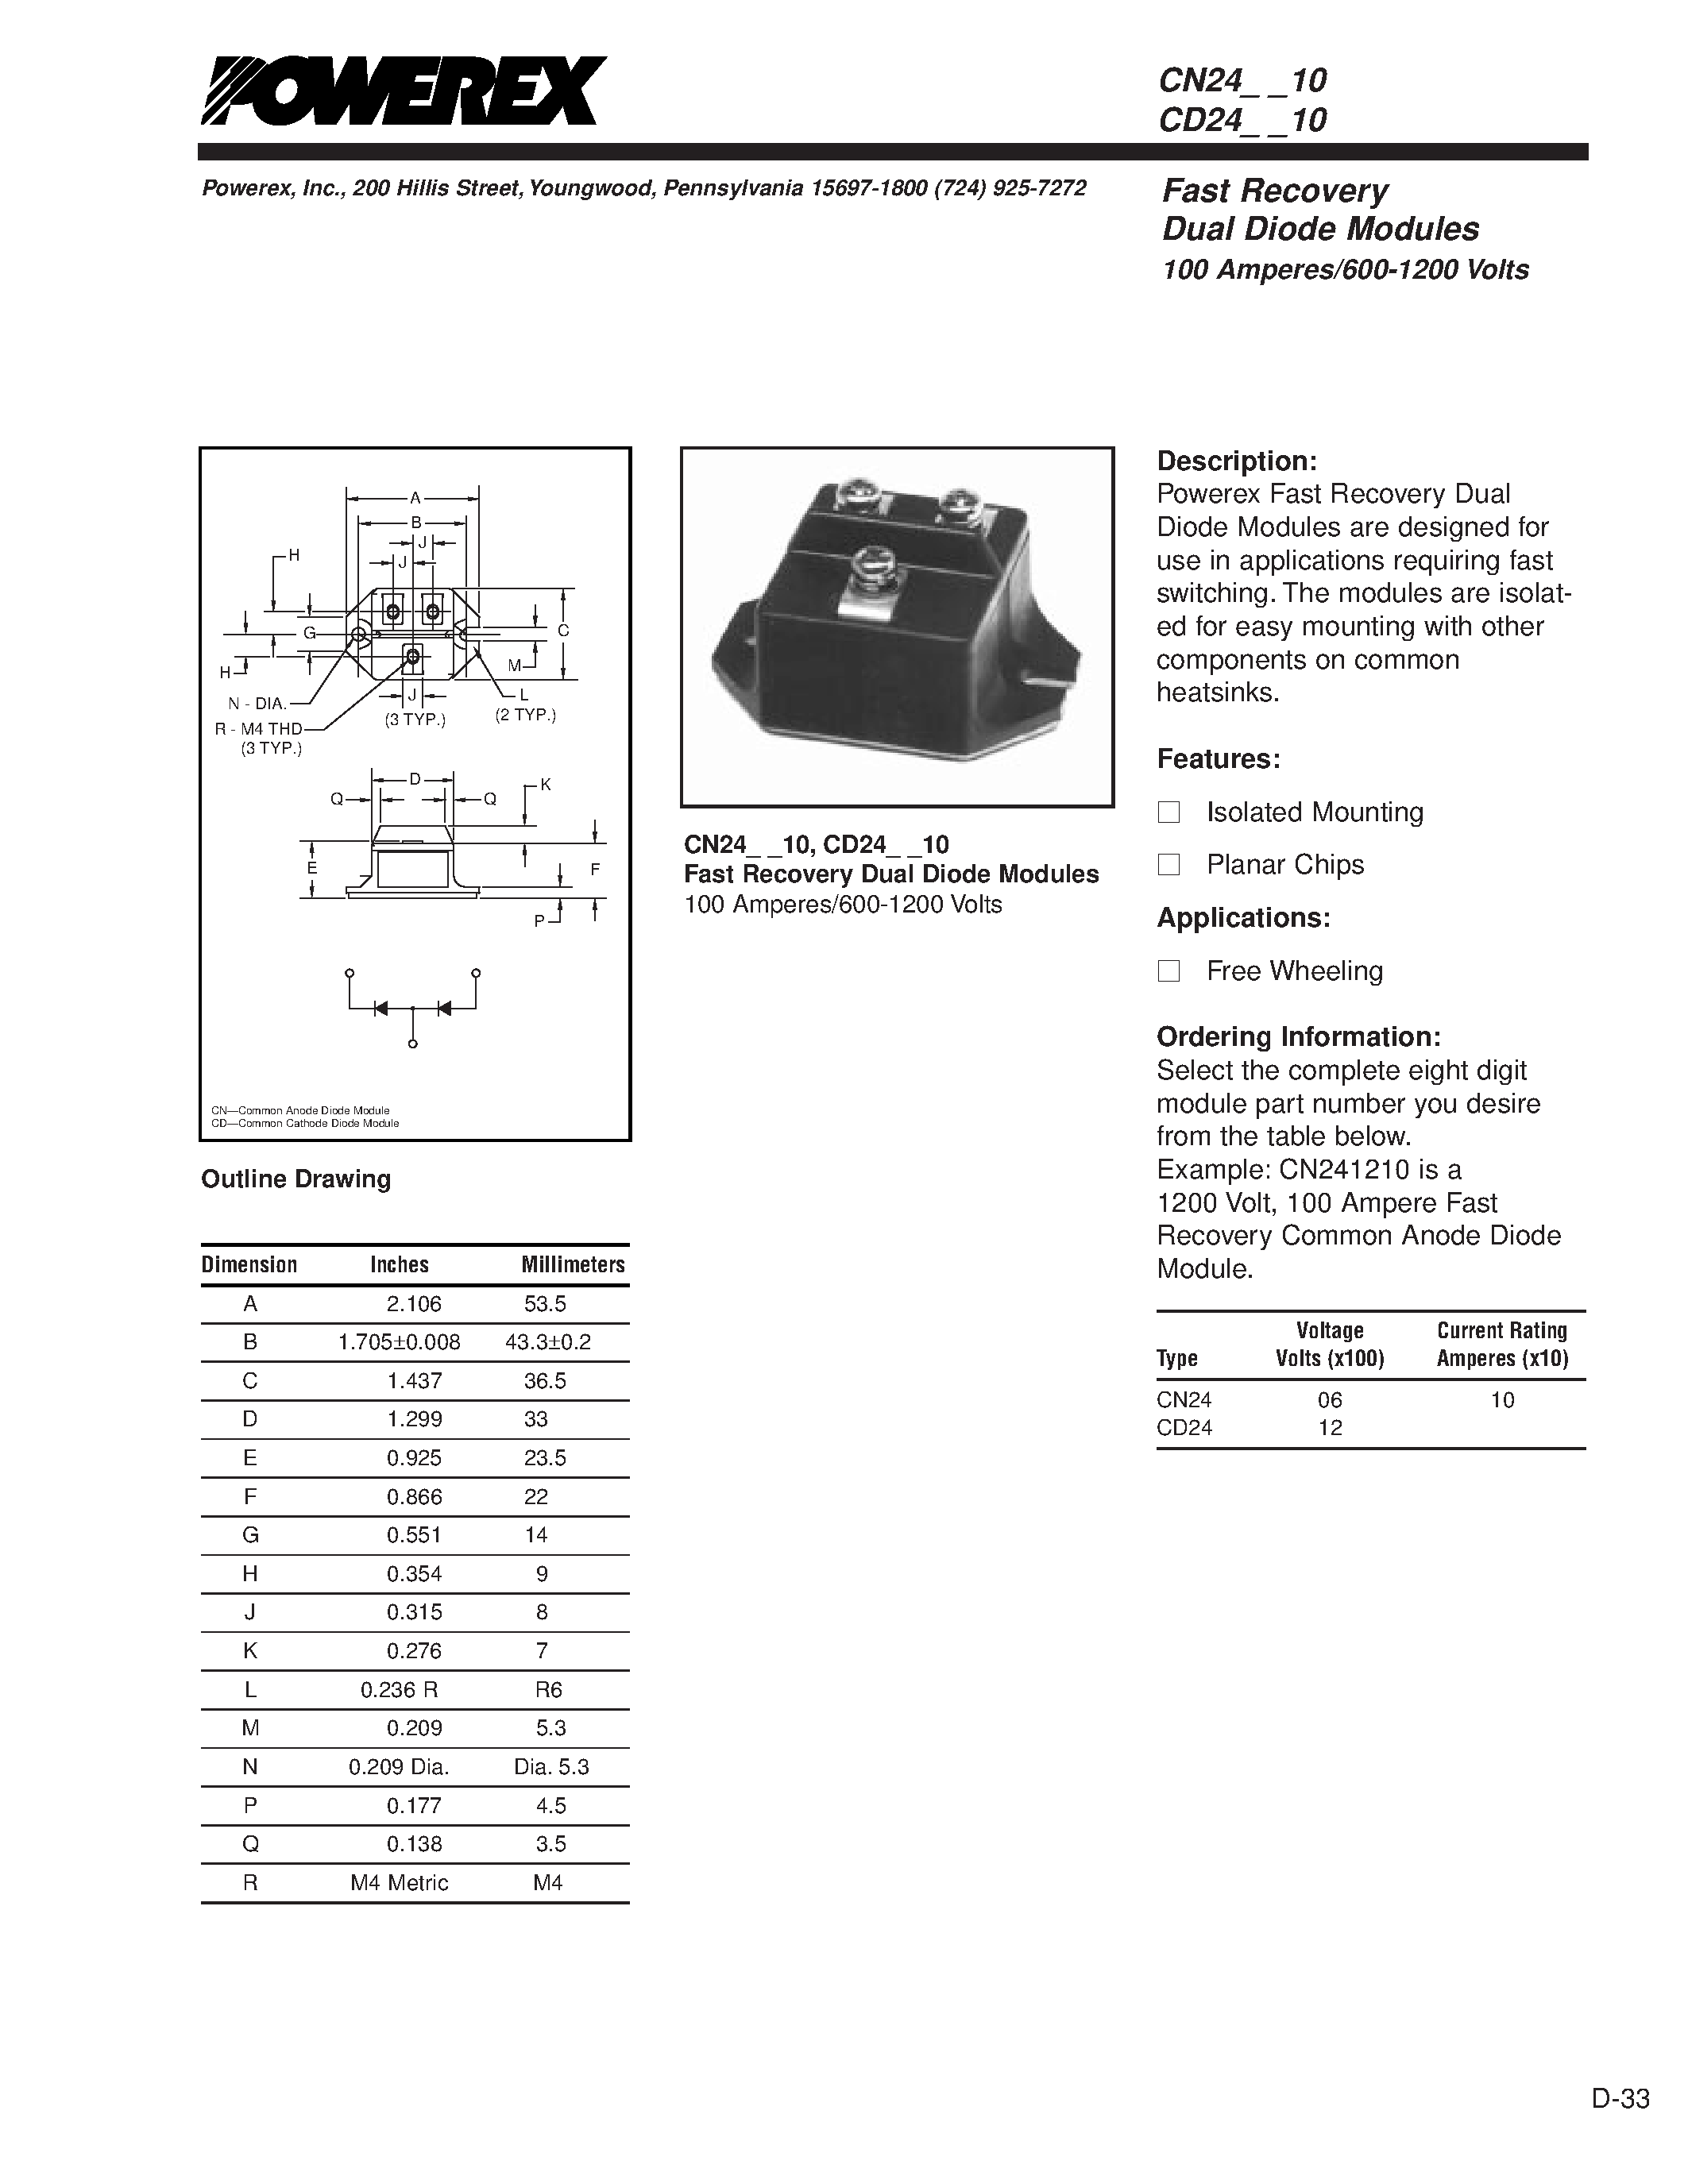 Datasheet CD241210 - Fast Recovery Dual Diode Modules 100 Amperes/600-1200 Volts page 1